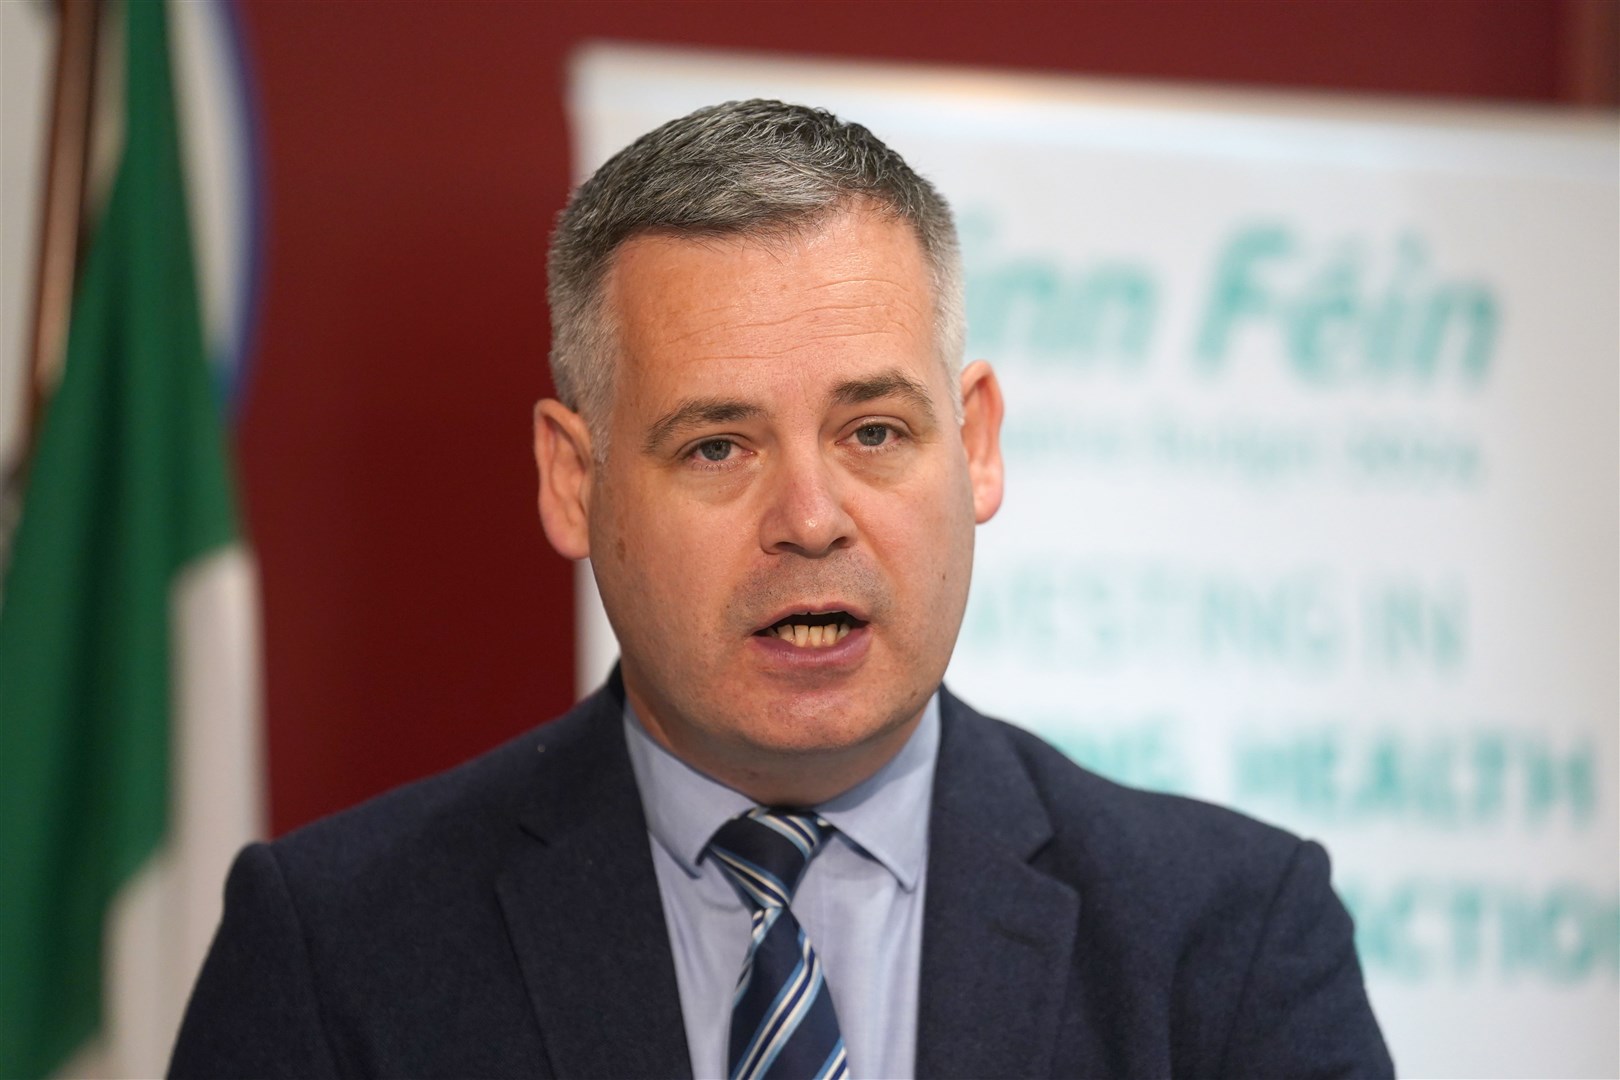 Sinn Fein’s Pearse Doherty accused the Government of ‘double standards’ (Brian Lawless/PA)